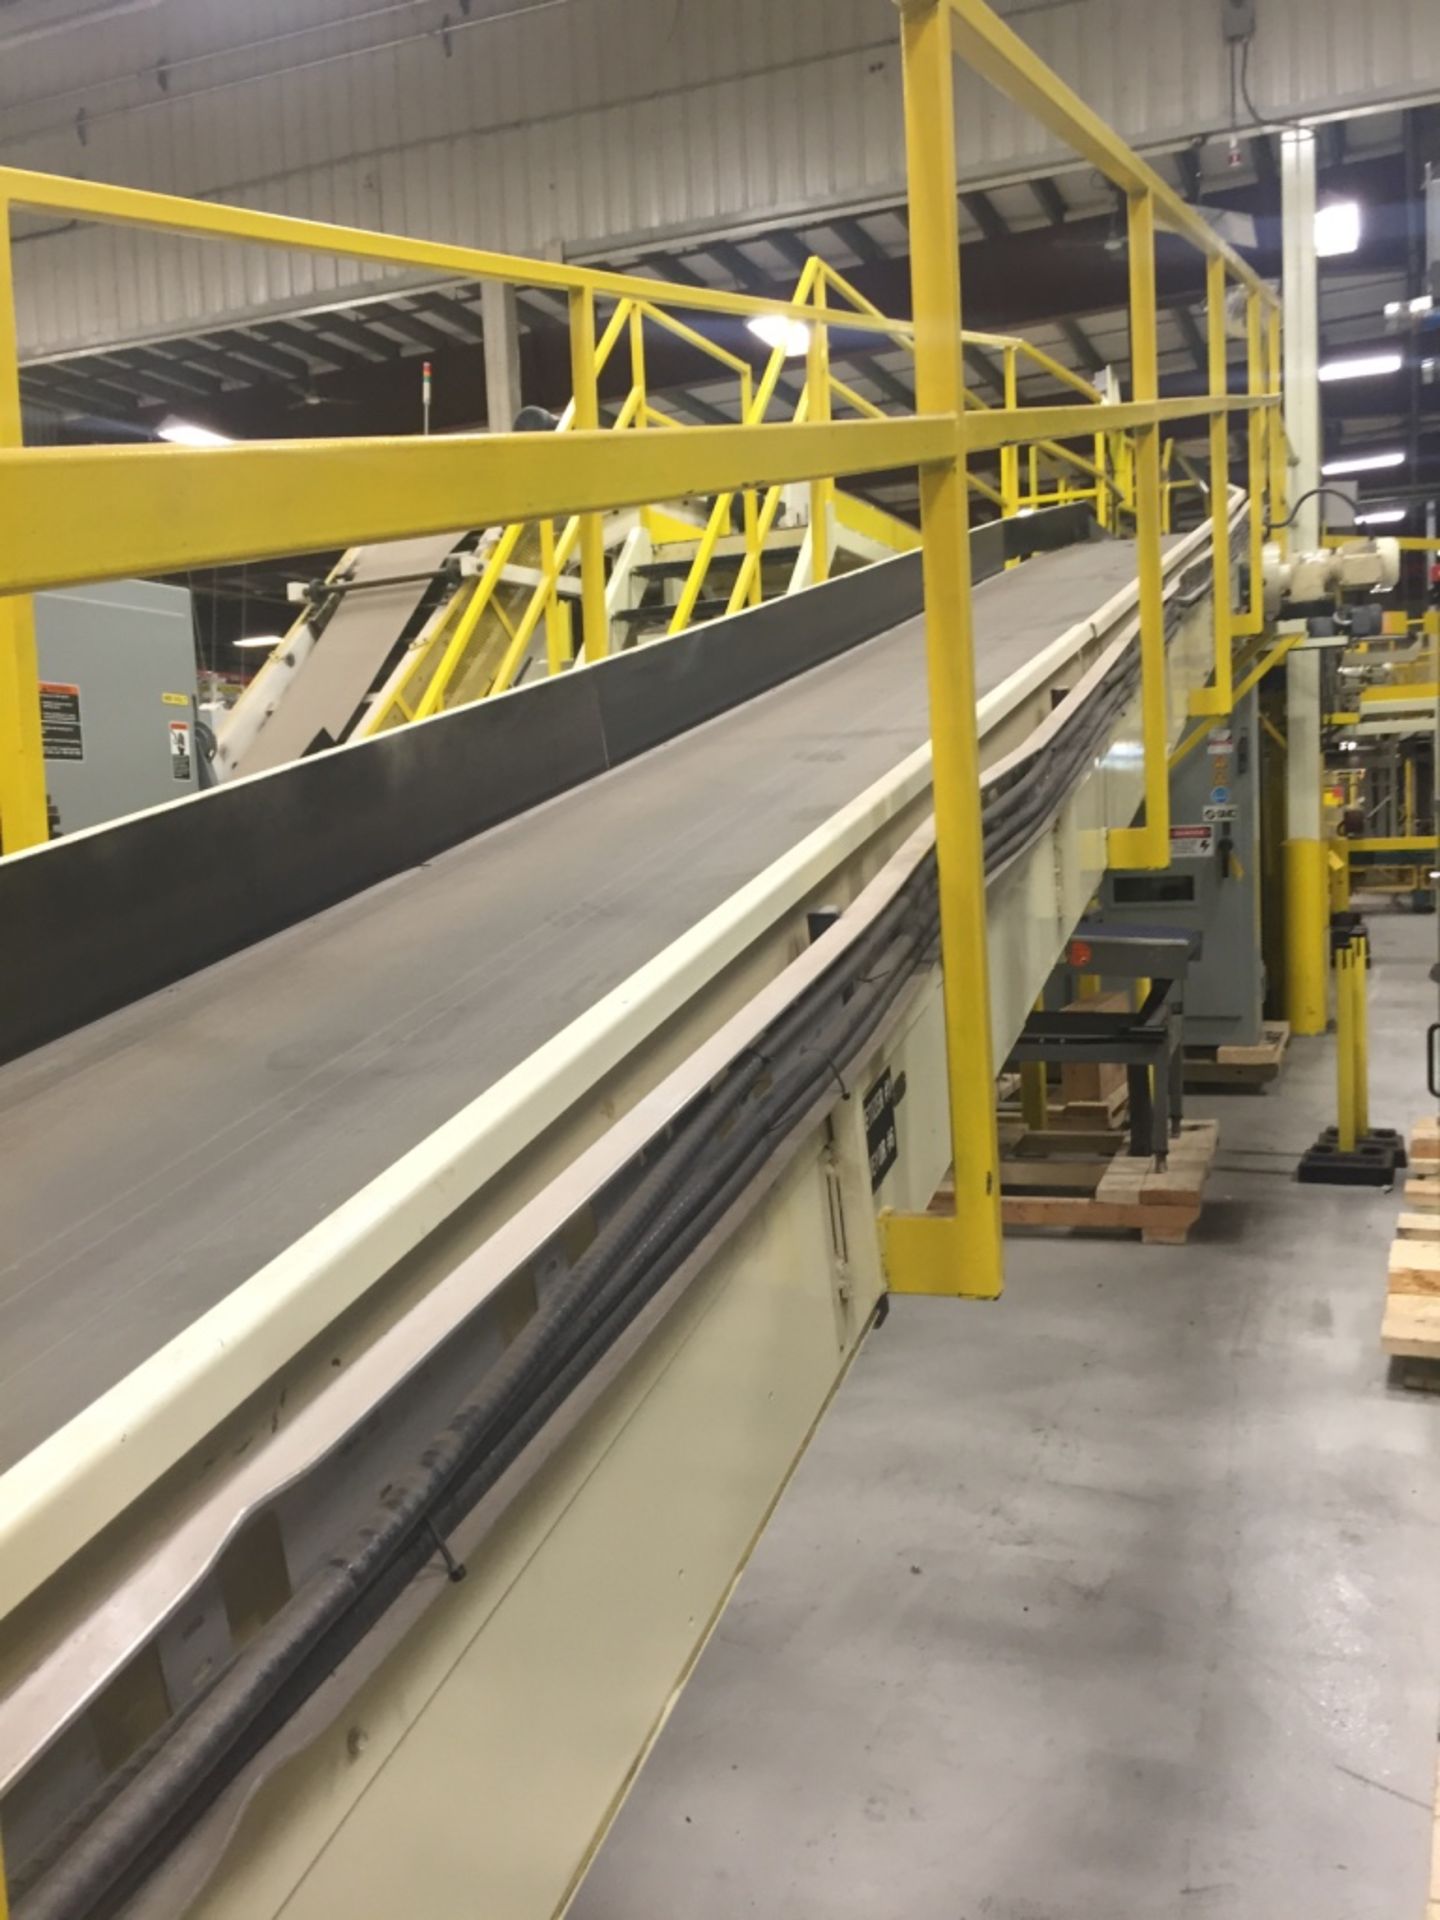 Incline Conveyor to Palletizer Includes Platforms - Image 2 of 3